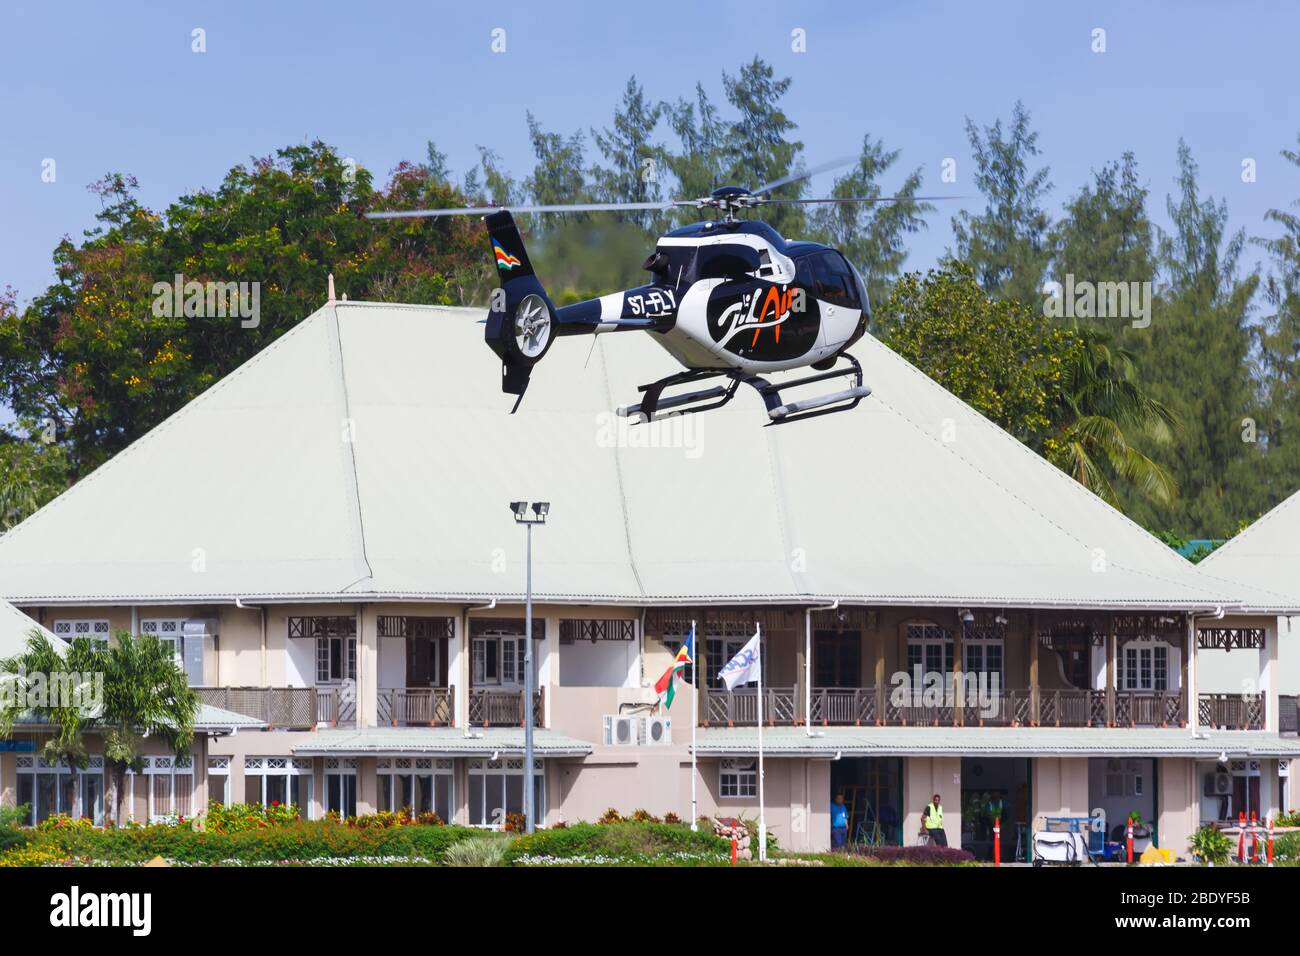 Praslin, Seychelles – February 7, 2020: Zil Air Airbus H120 helicopter at Praslin airport (PRI) in the Seychelles. Stock Photo